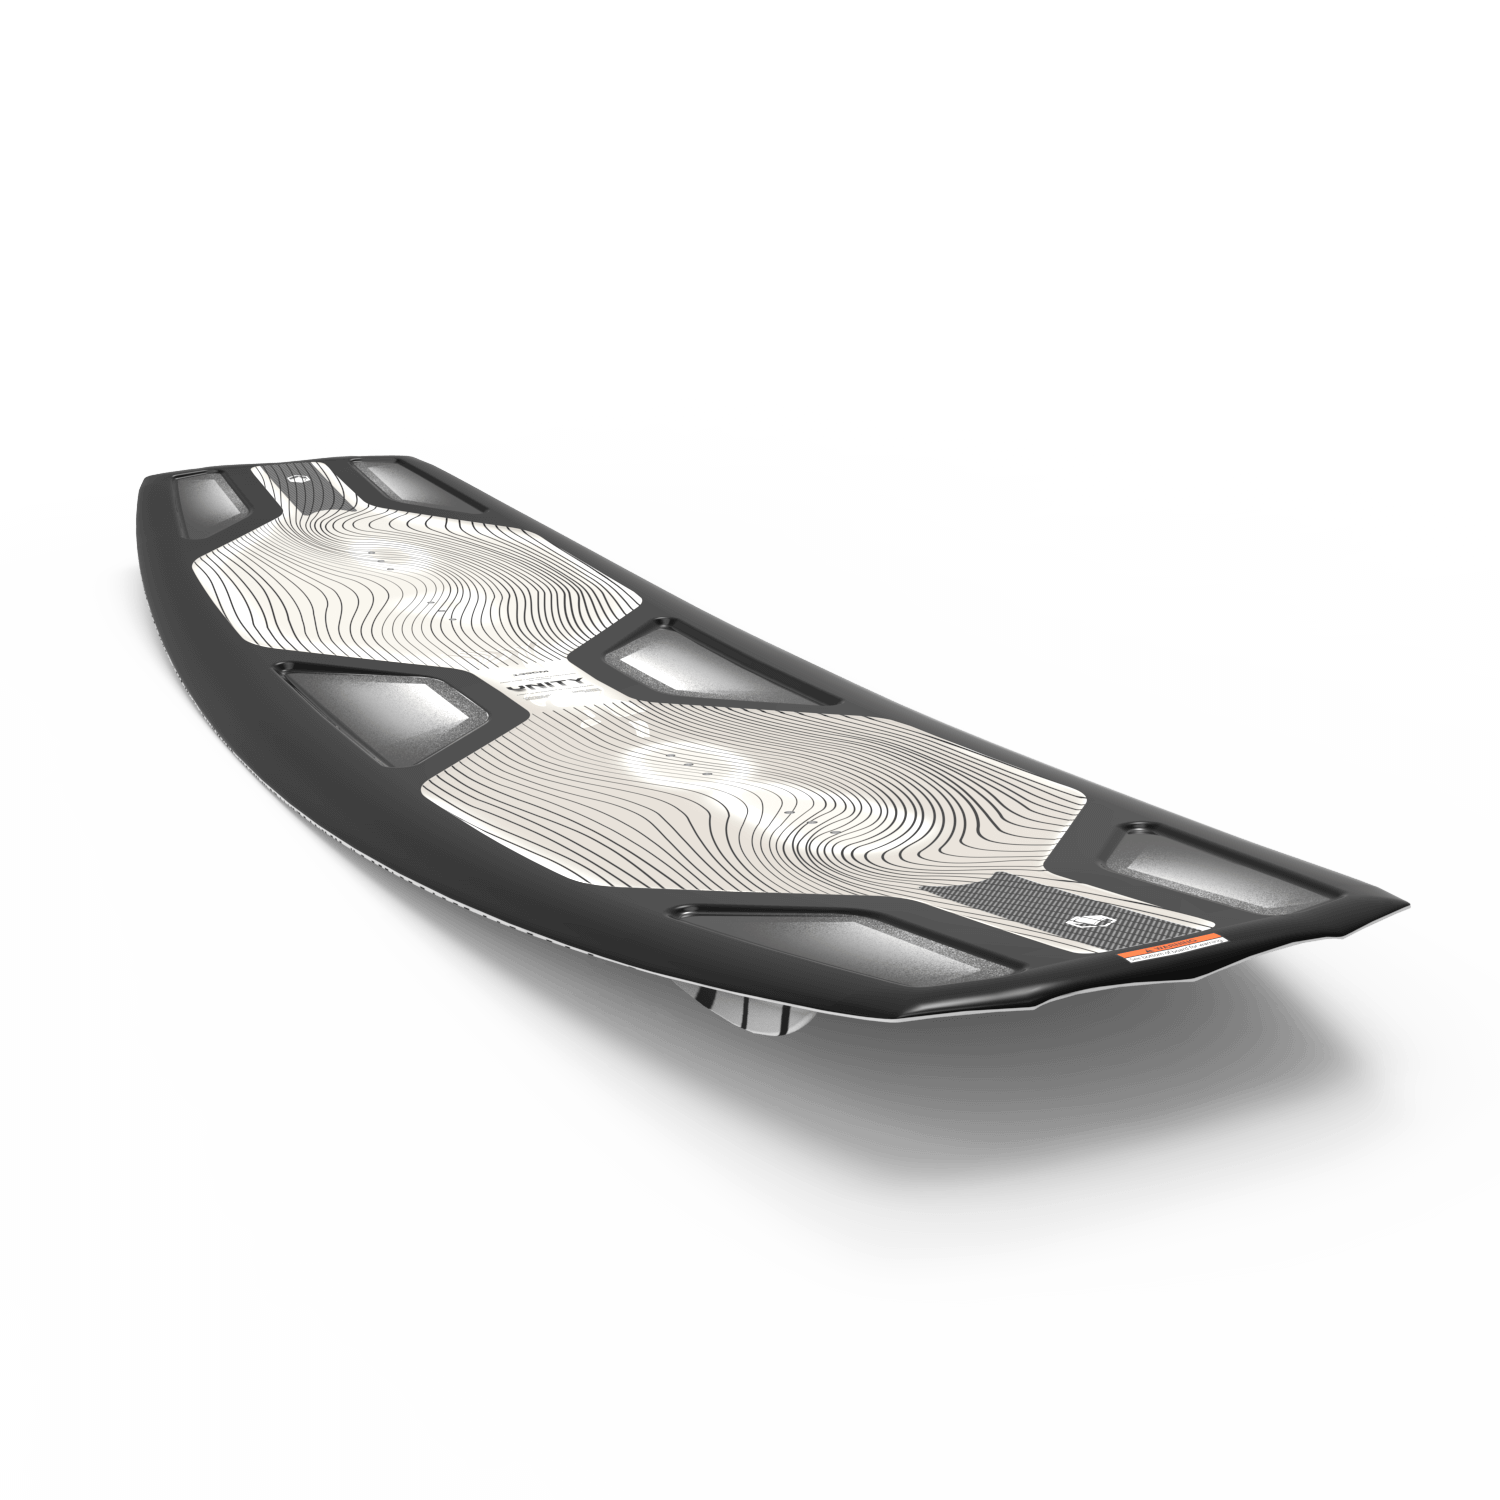 A Liquid Force 2024 Unity Aero Wakeboard (Pre-Order) with an aggressive continuous rocker on a white surface.